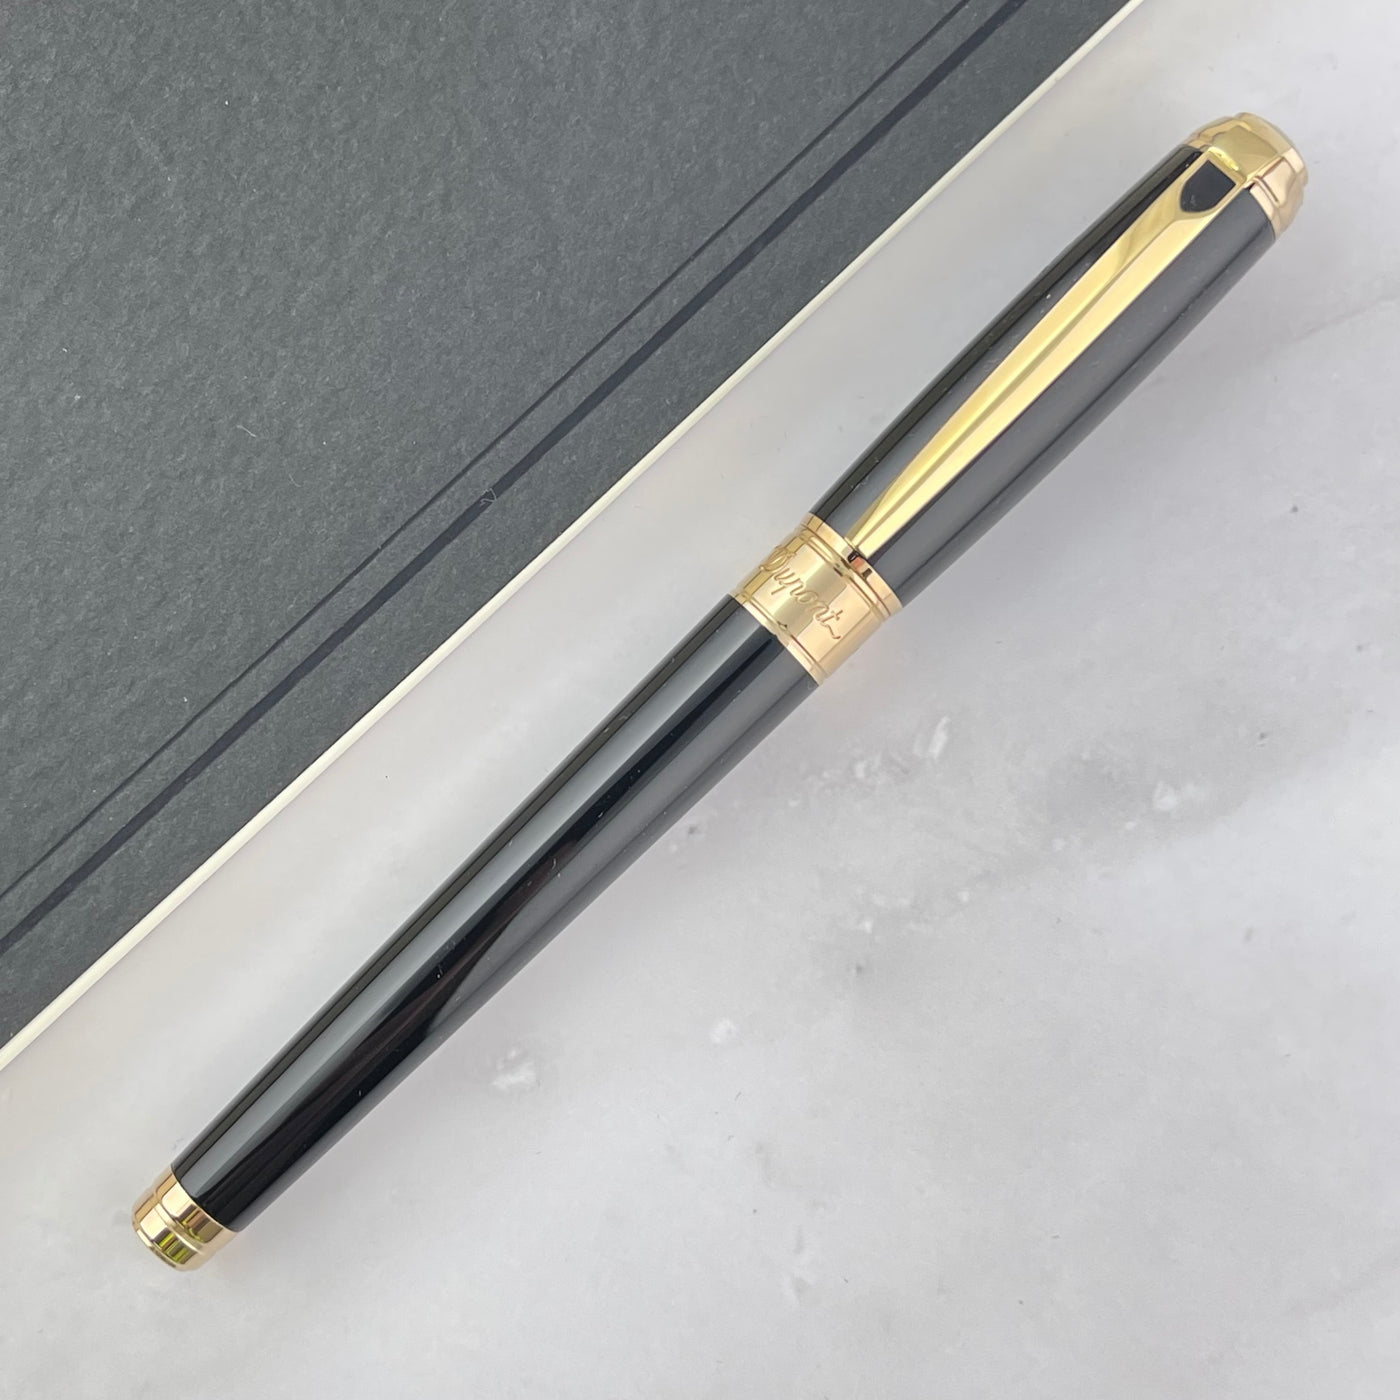 S.T. Dupont Line D Medium Rollerball Pen - Black with Gold Trim